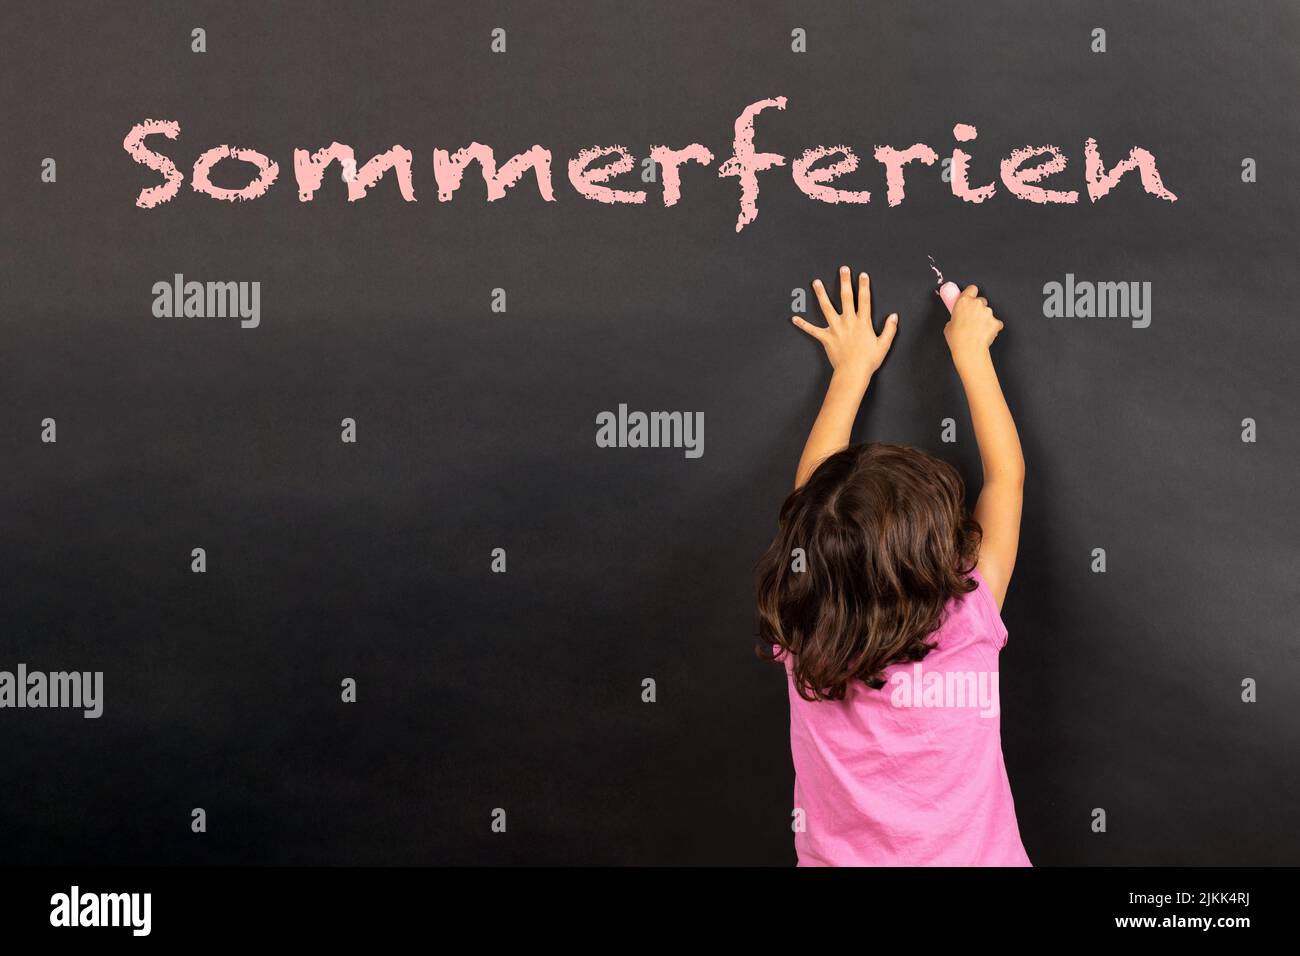 girl writing on a blackboard the german text Sommerferien, in english summer holiday Stock Photo